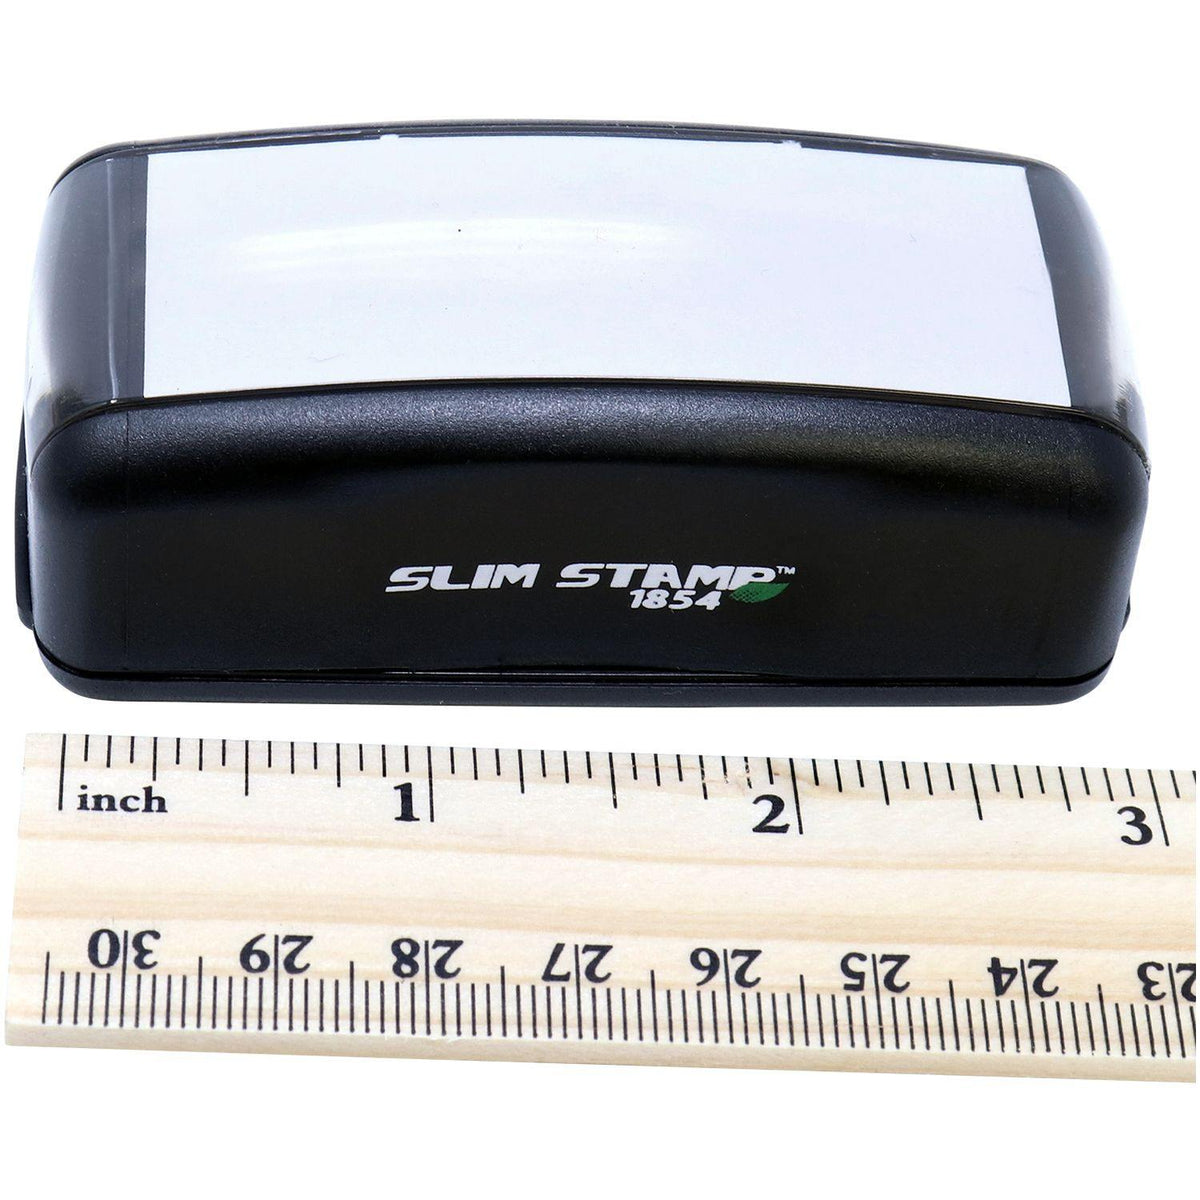 Measurement Large Pre-Inked Please Review with your child Stamp with Ruler